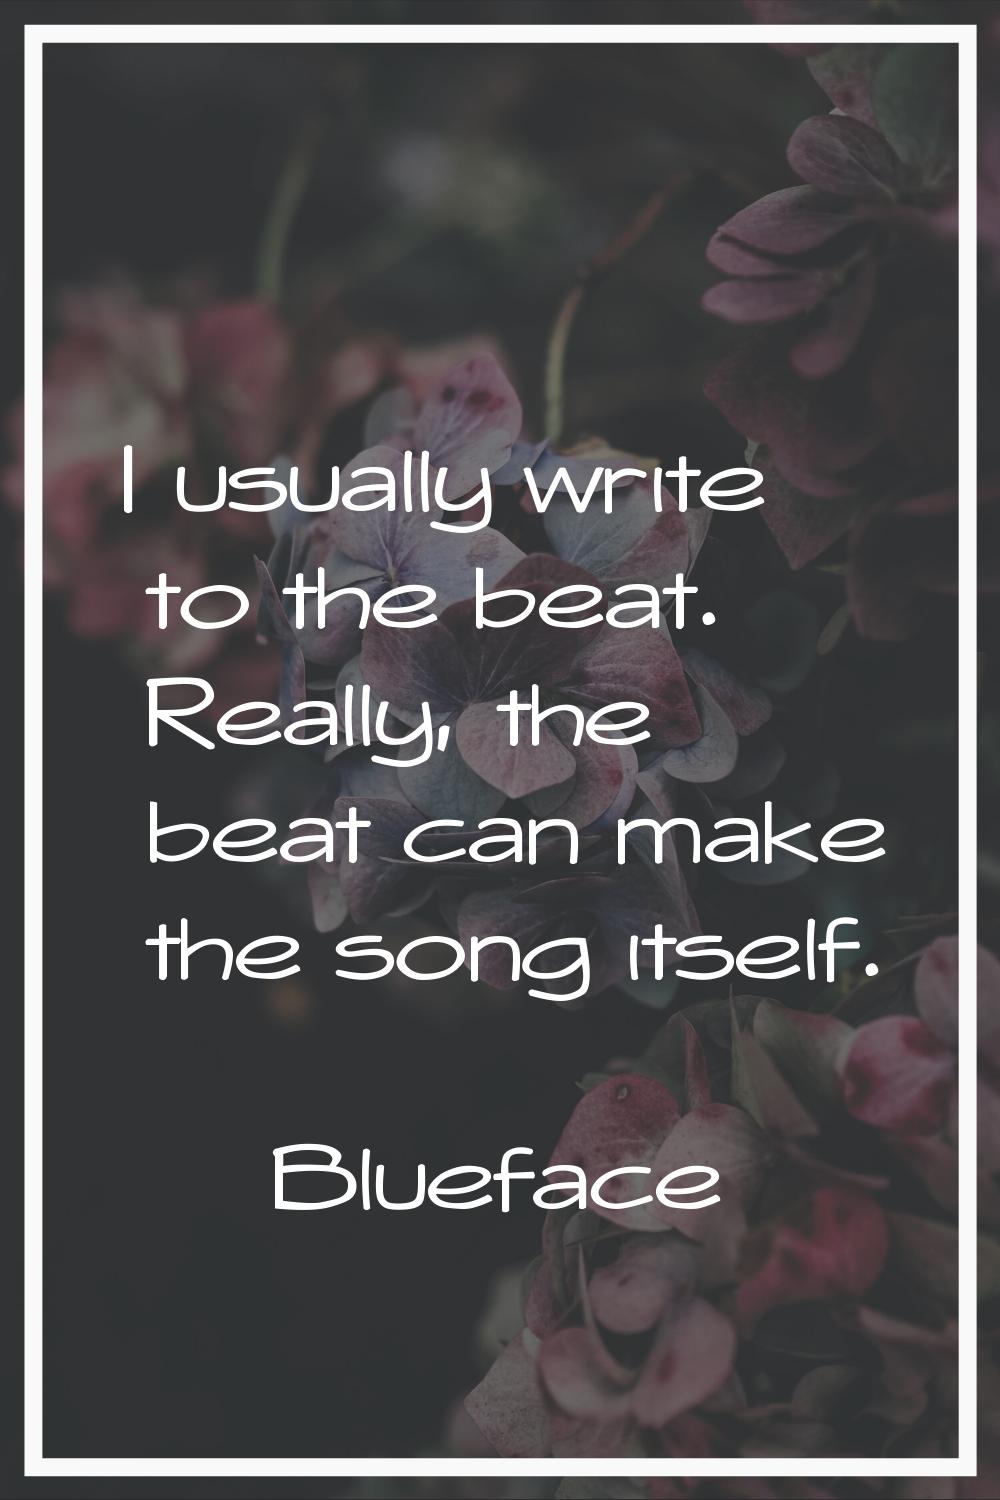 I usually write to the beat. Really, the beat can make the song itself.